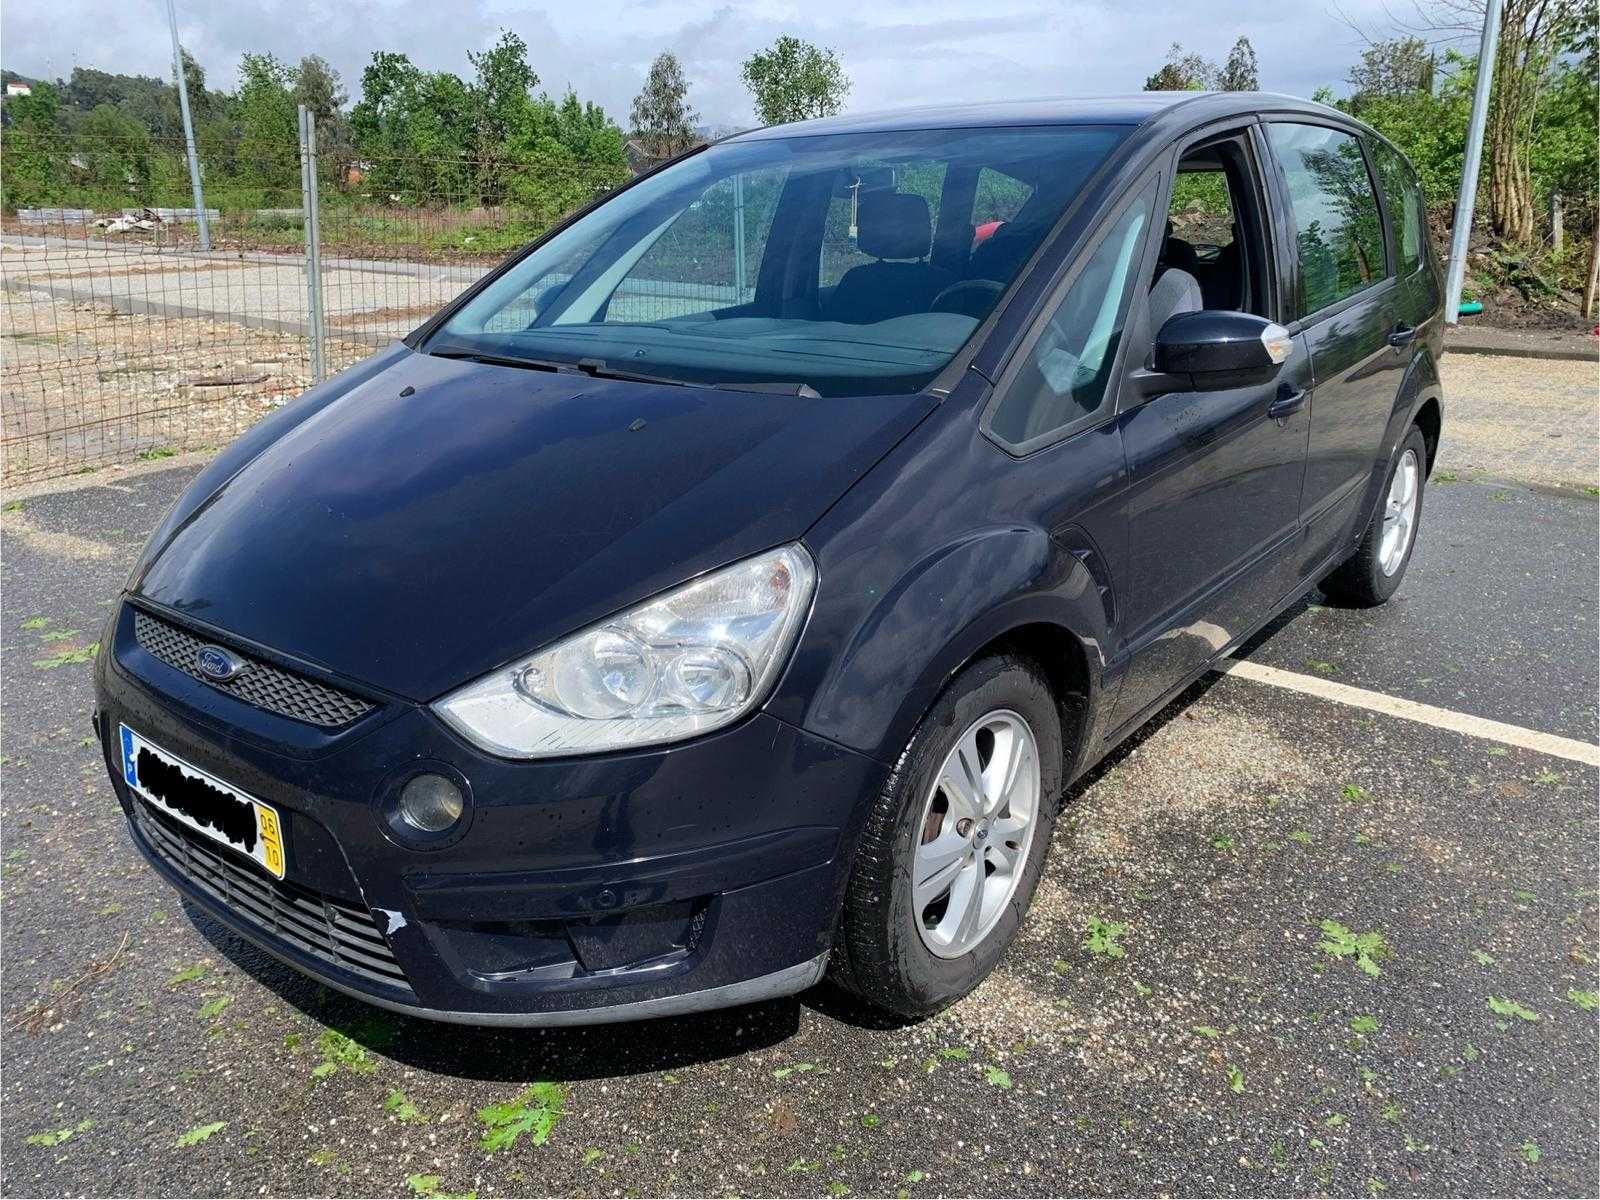 FORD SMAX 1.8tdci 2006